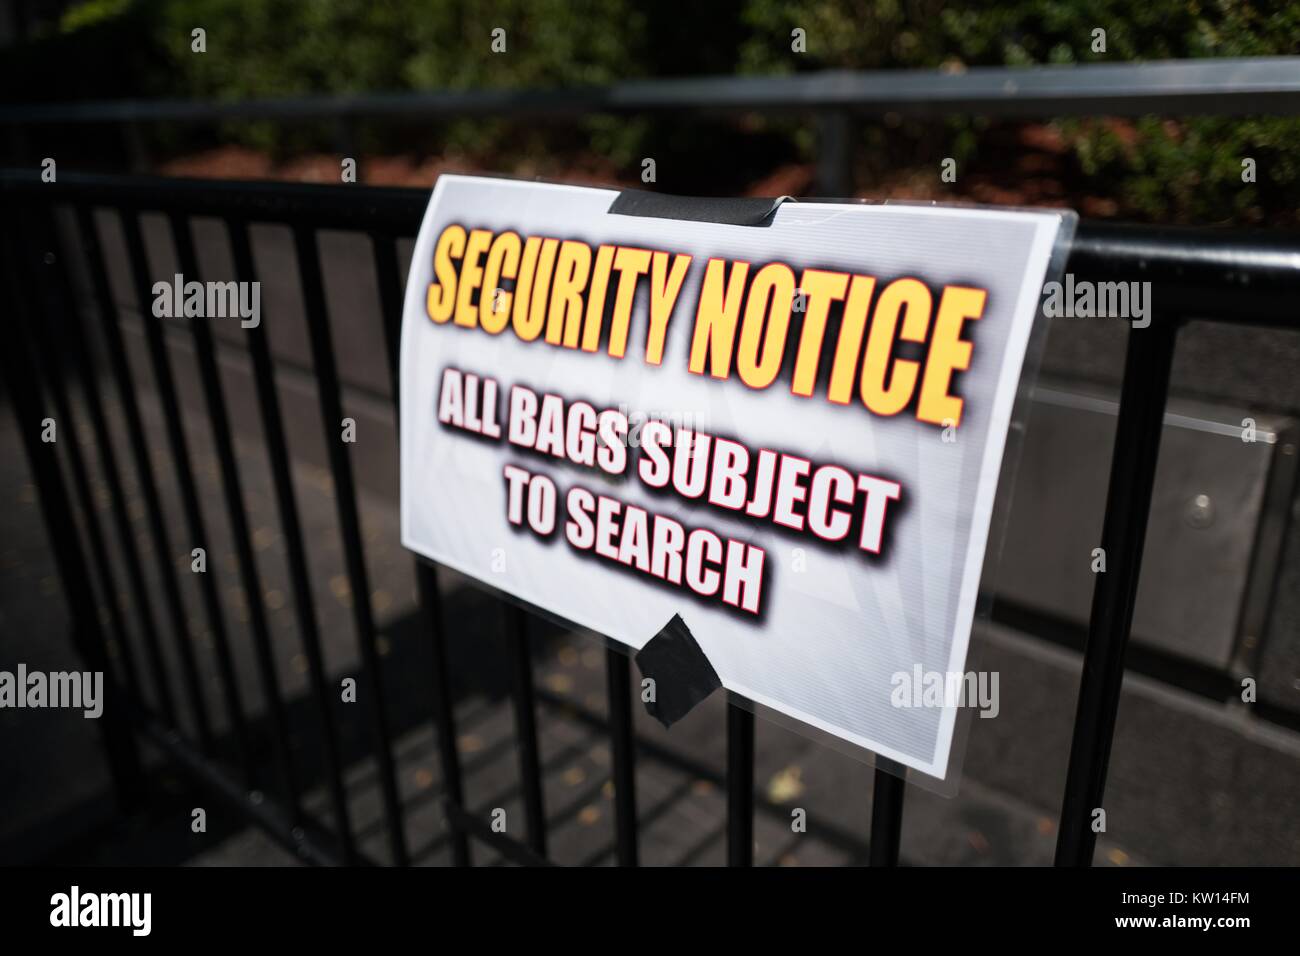 A security notice on a police barricade, indicating that 'All Bags Are Subject to Search', Manhattan, New York City, New York, July, 2016. Stock Photo